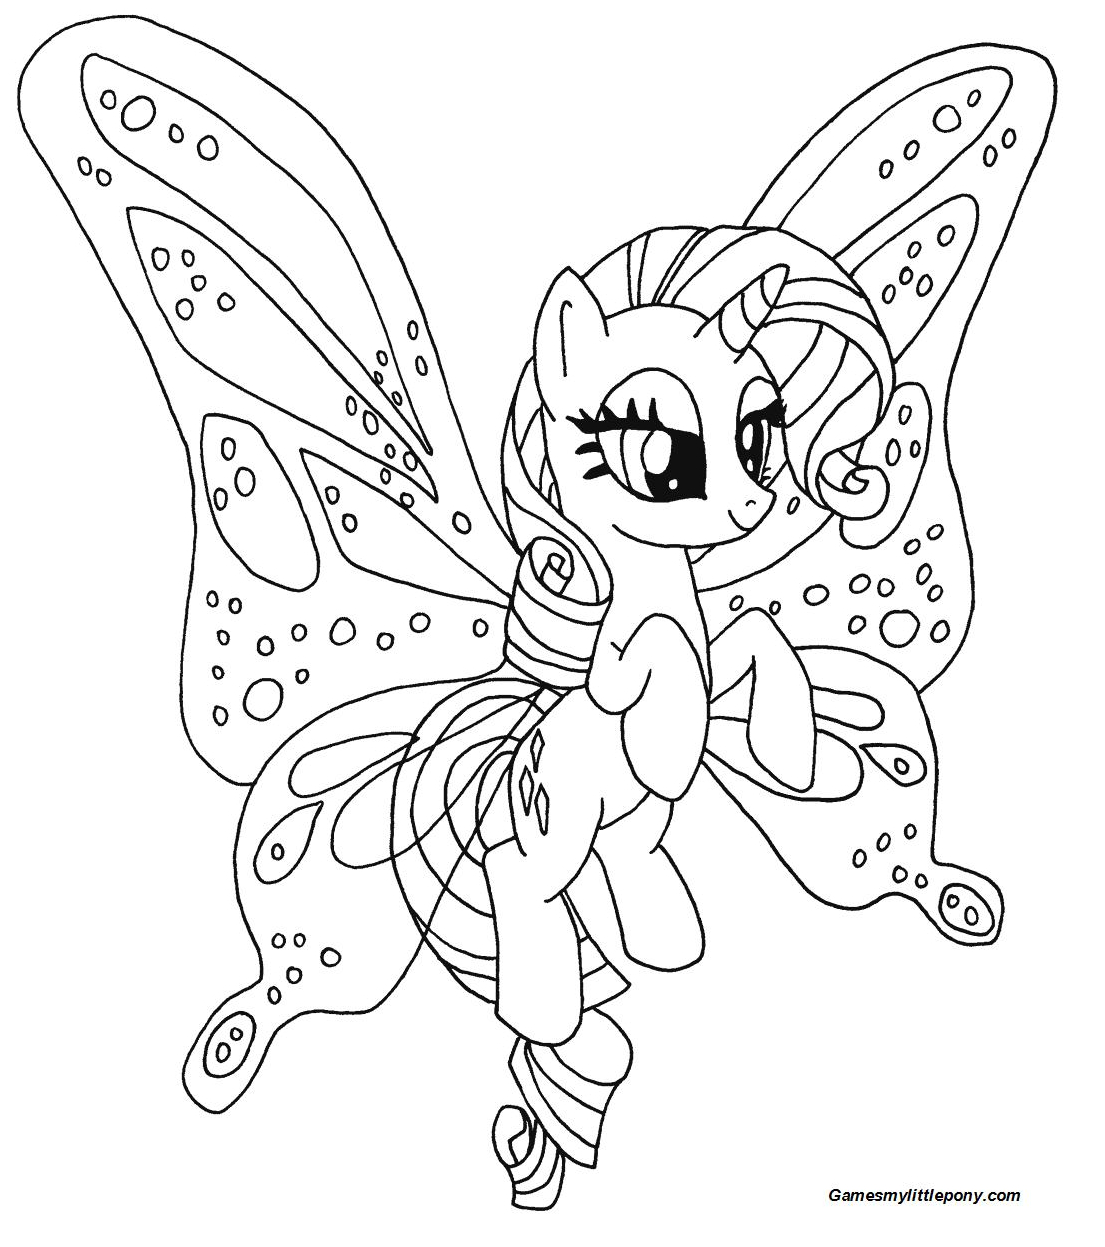 Rarity Pony from My Little Pony Coloring Page